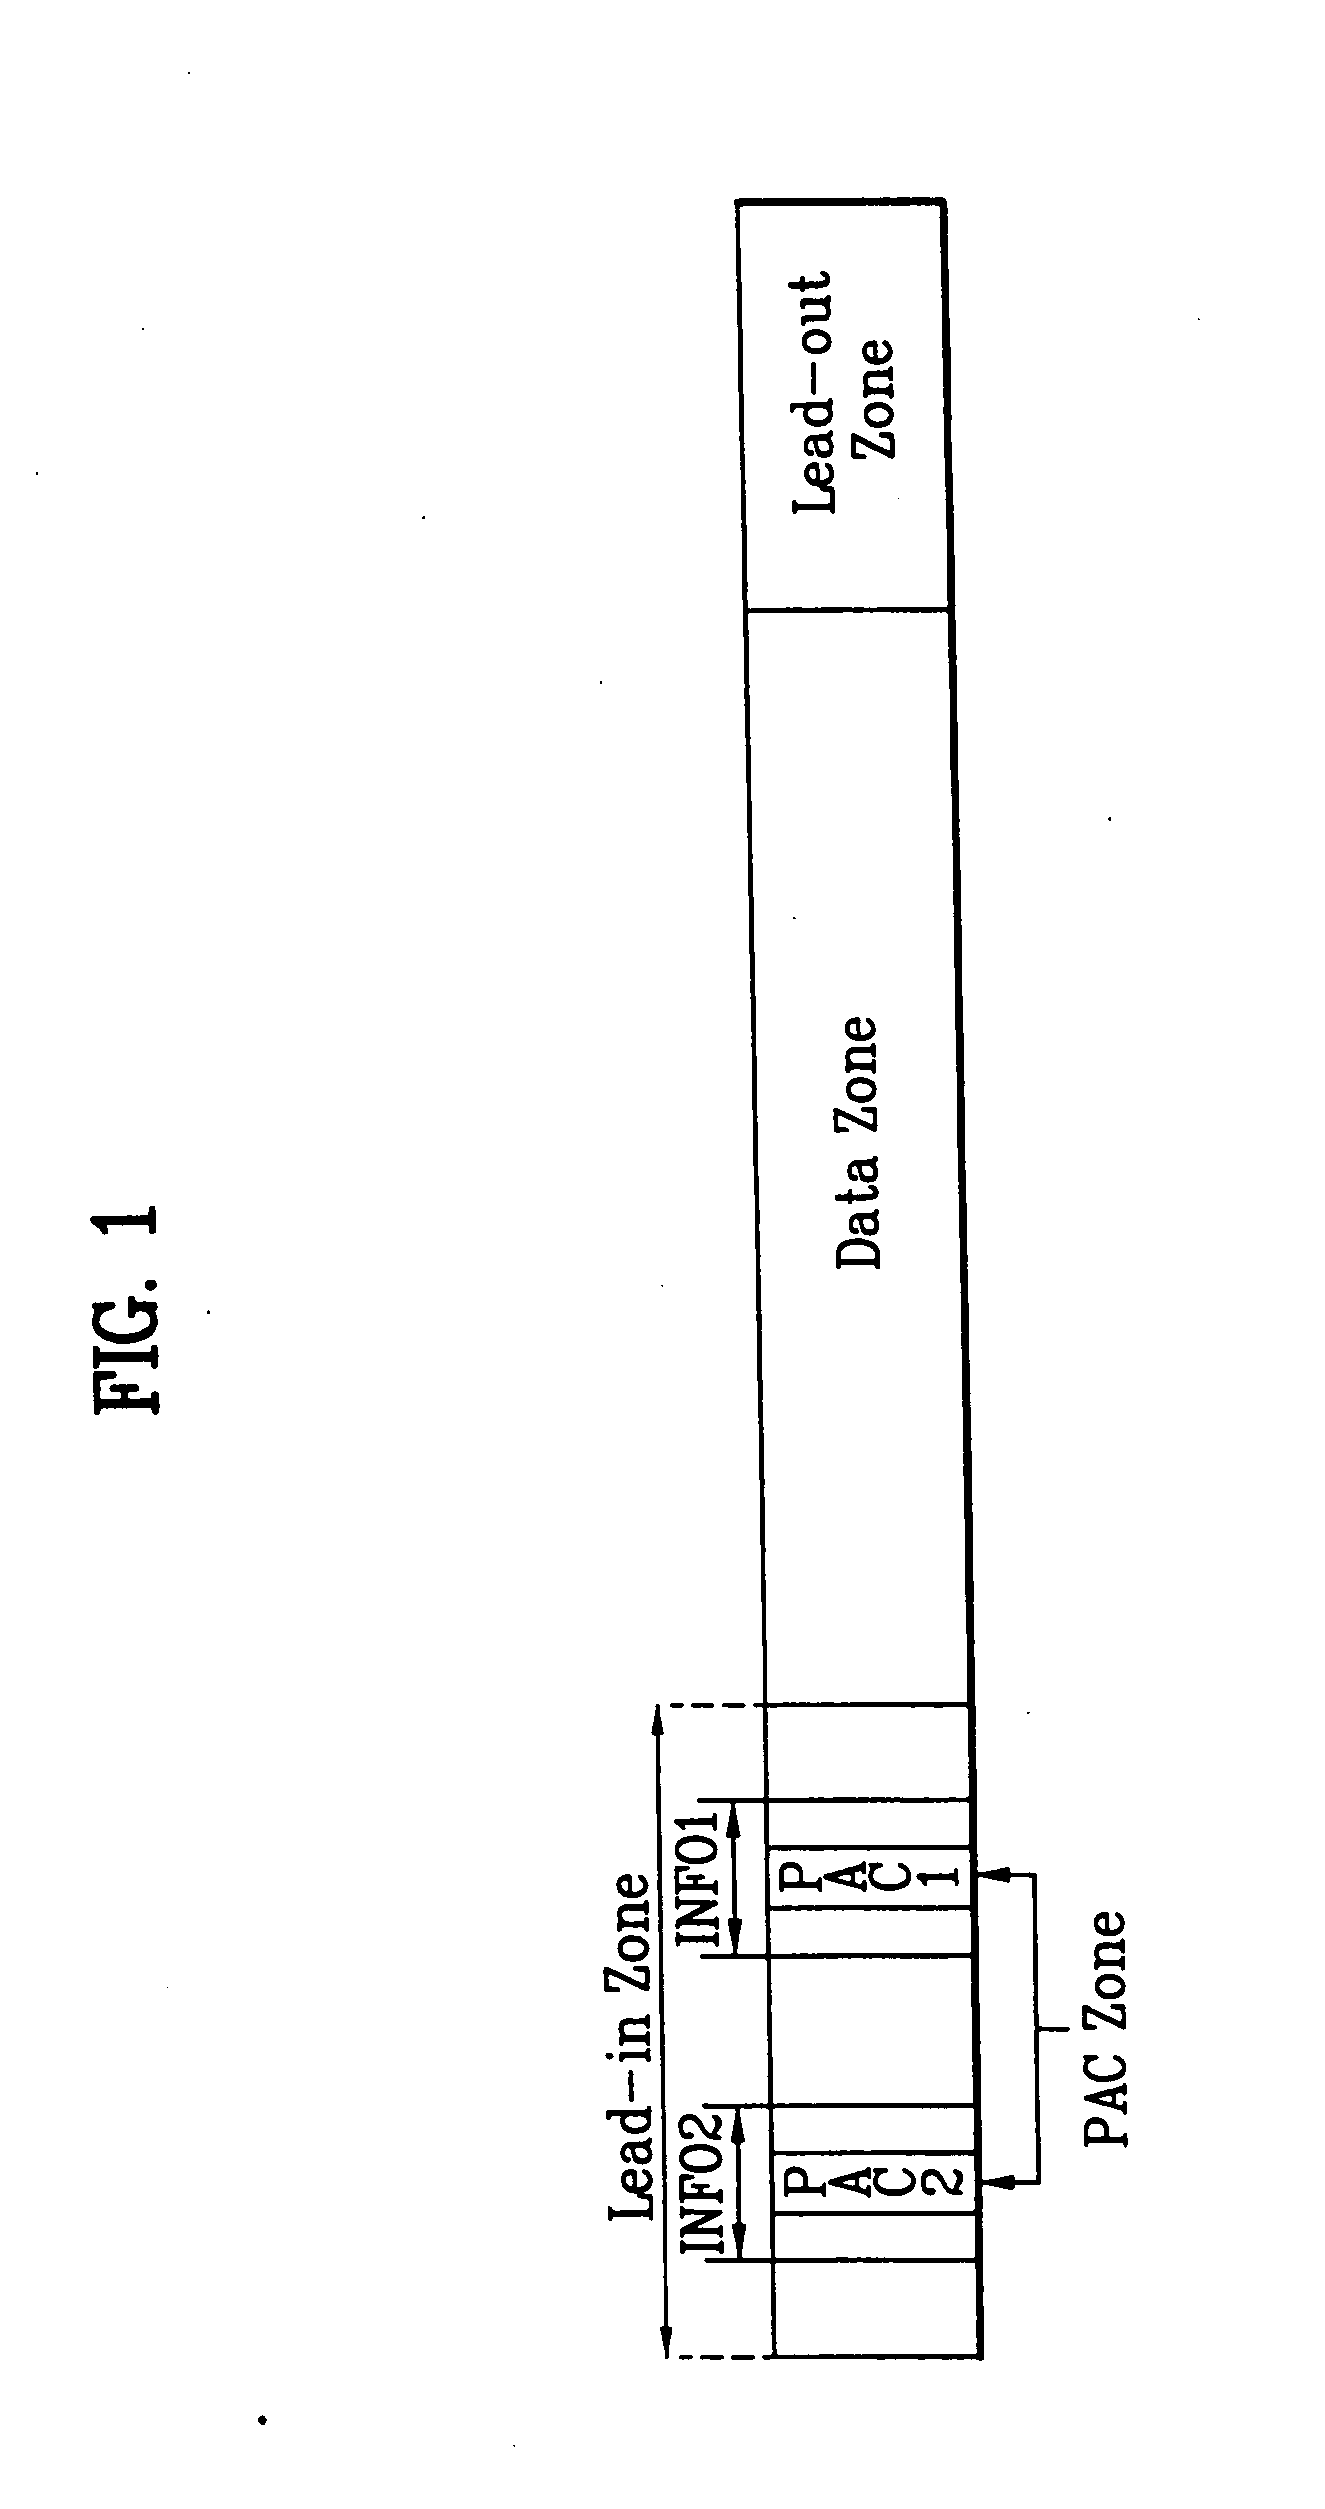 Recording medium with segment information thereon and apparatus and methods for forming, recording, and reproducing the recording medium